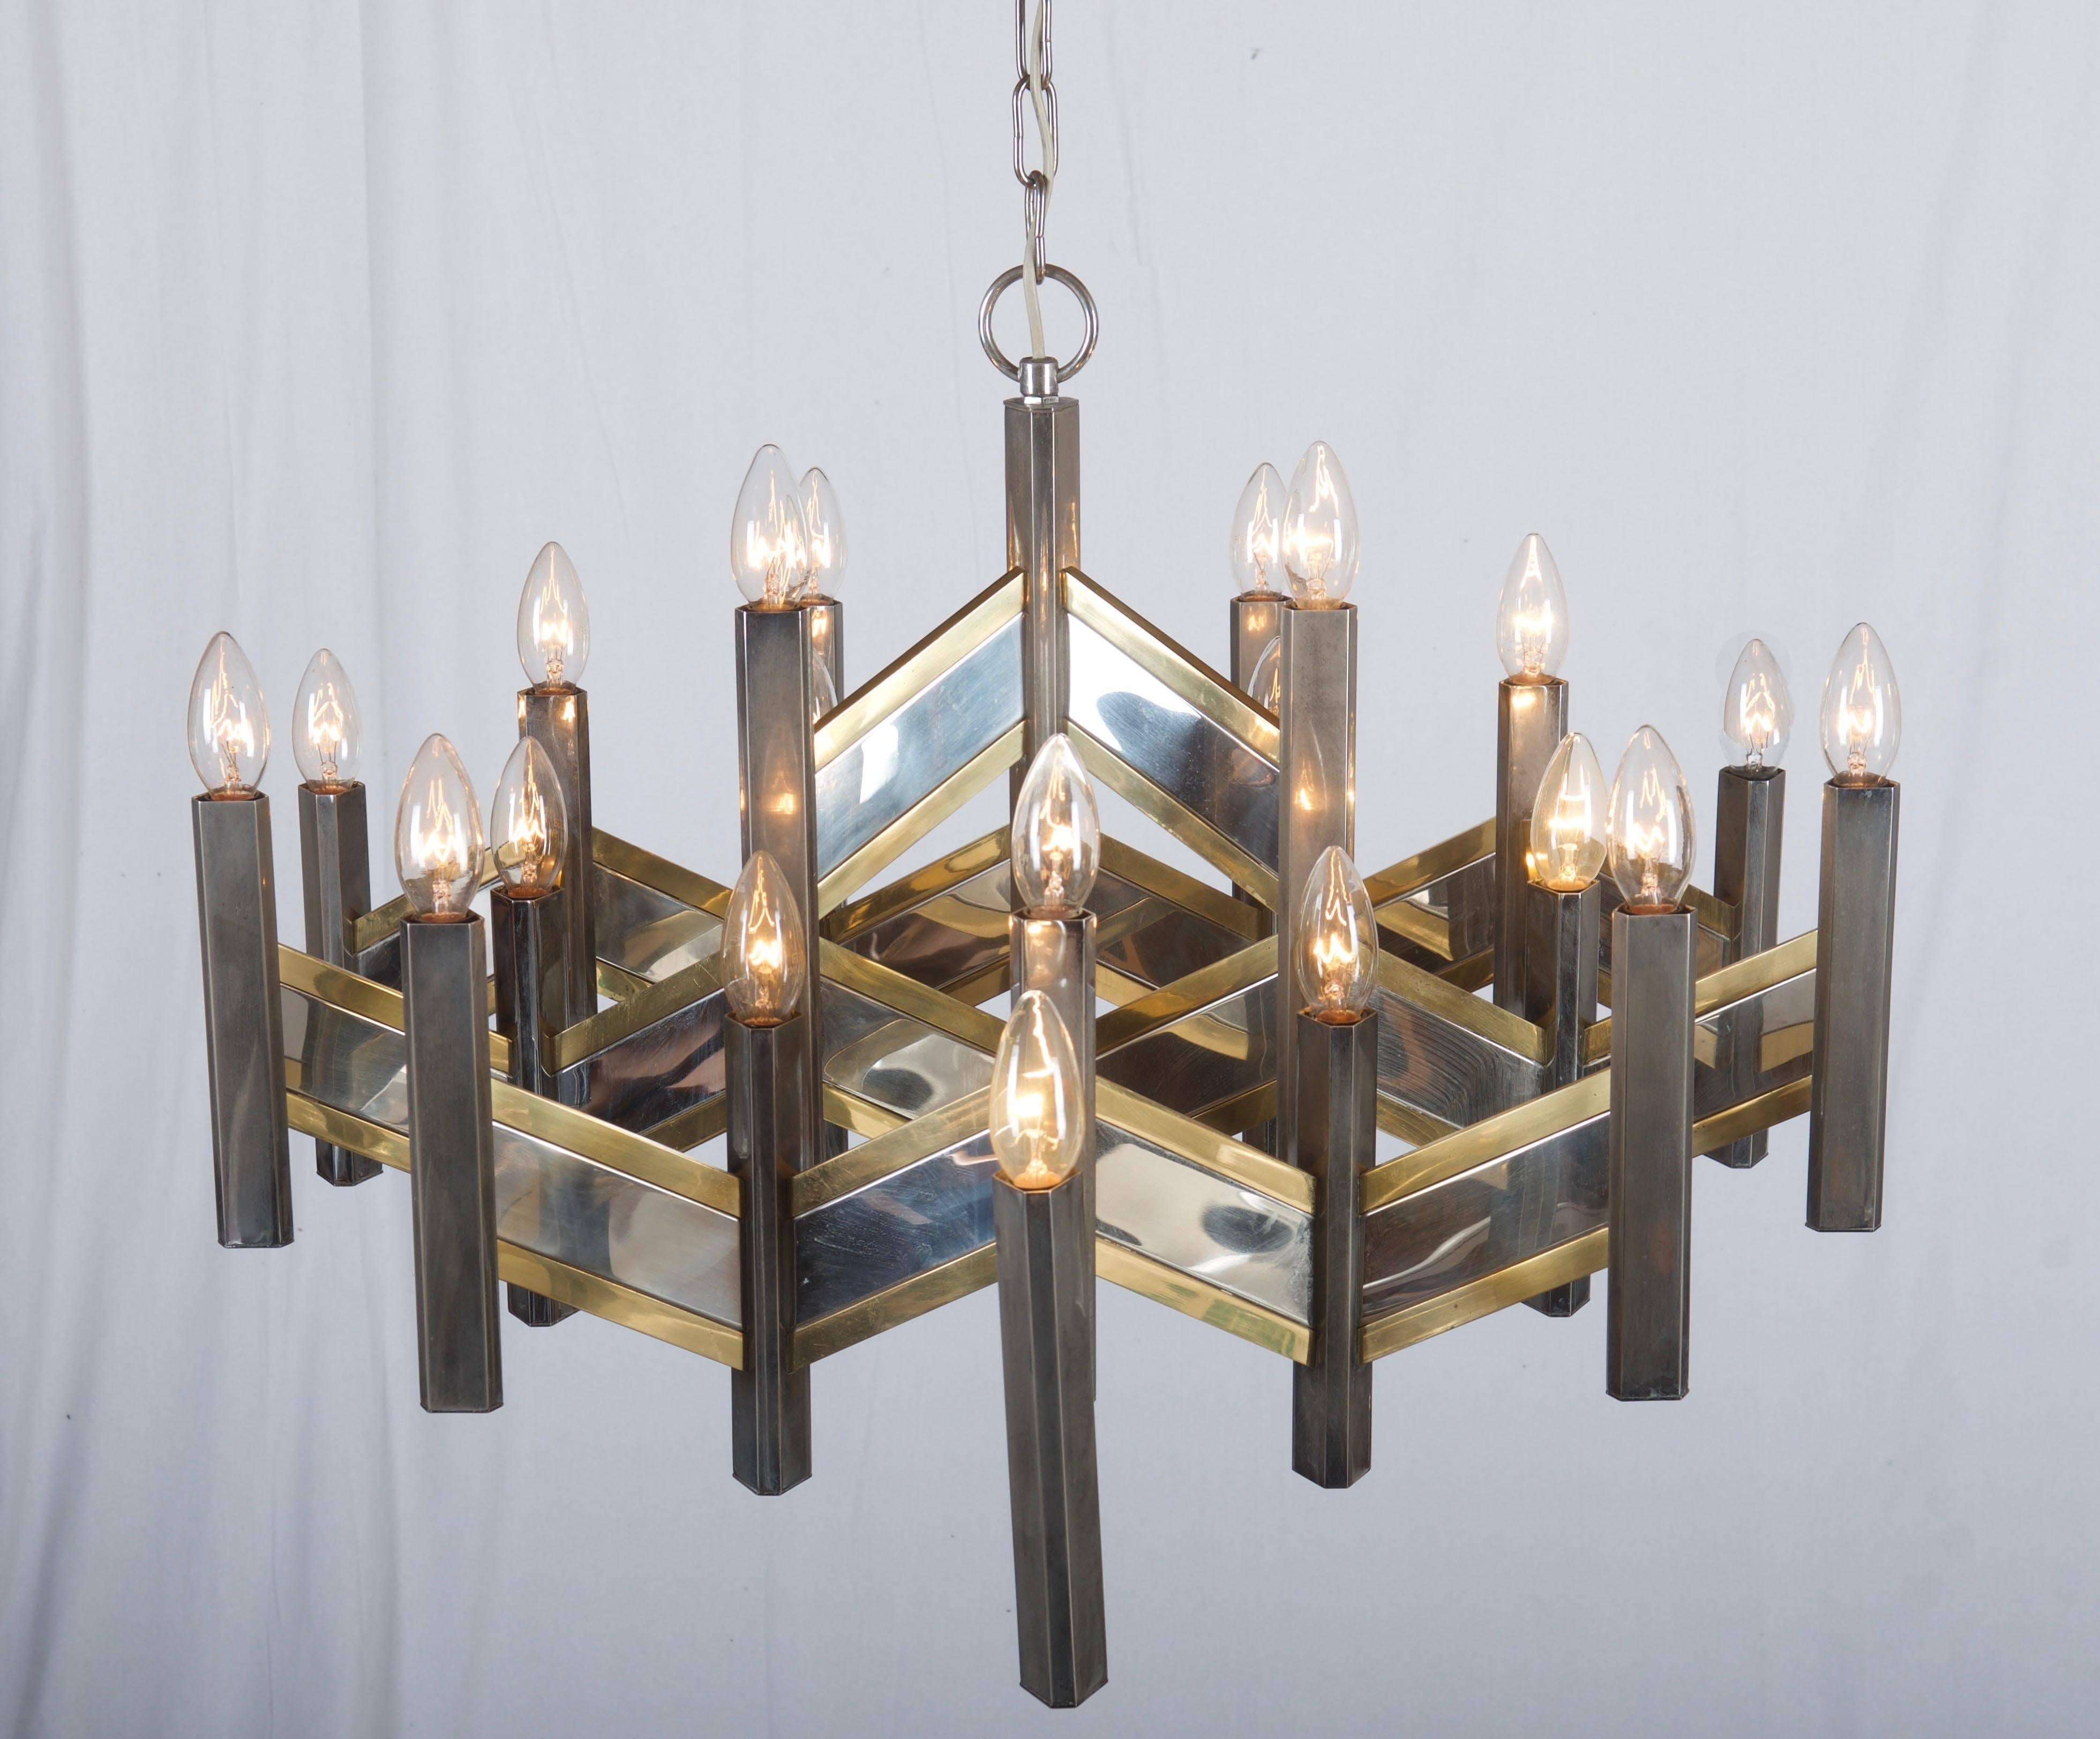 Rare huge chevron zig zag body form chandelier fitted with 21 E14 lights up to 60watts designed by Gaetano Sciolari in the 1960s. Made of polished chrome and brass. Some scratches and patina to chrome panels, the reason for the price.